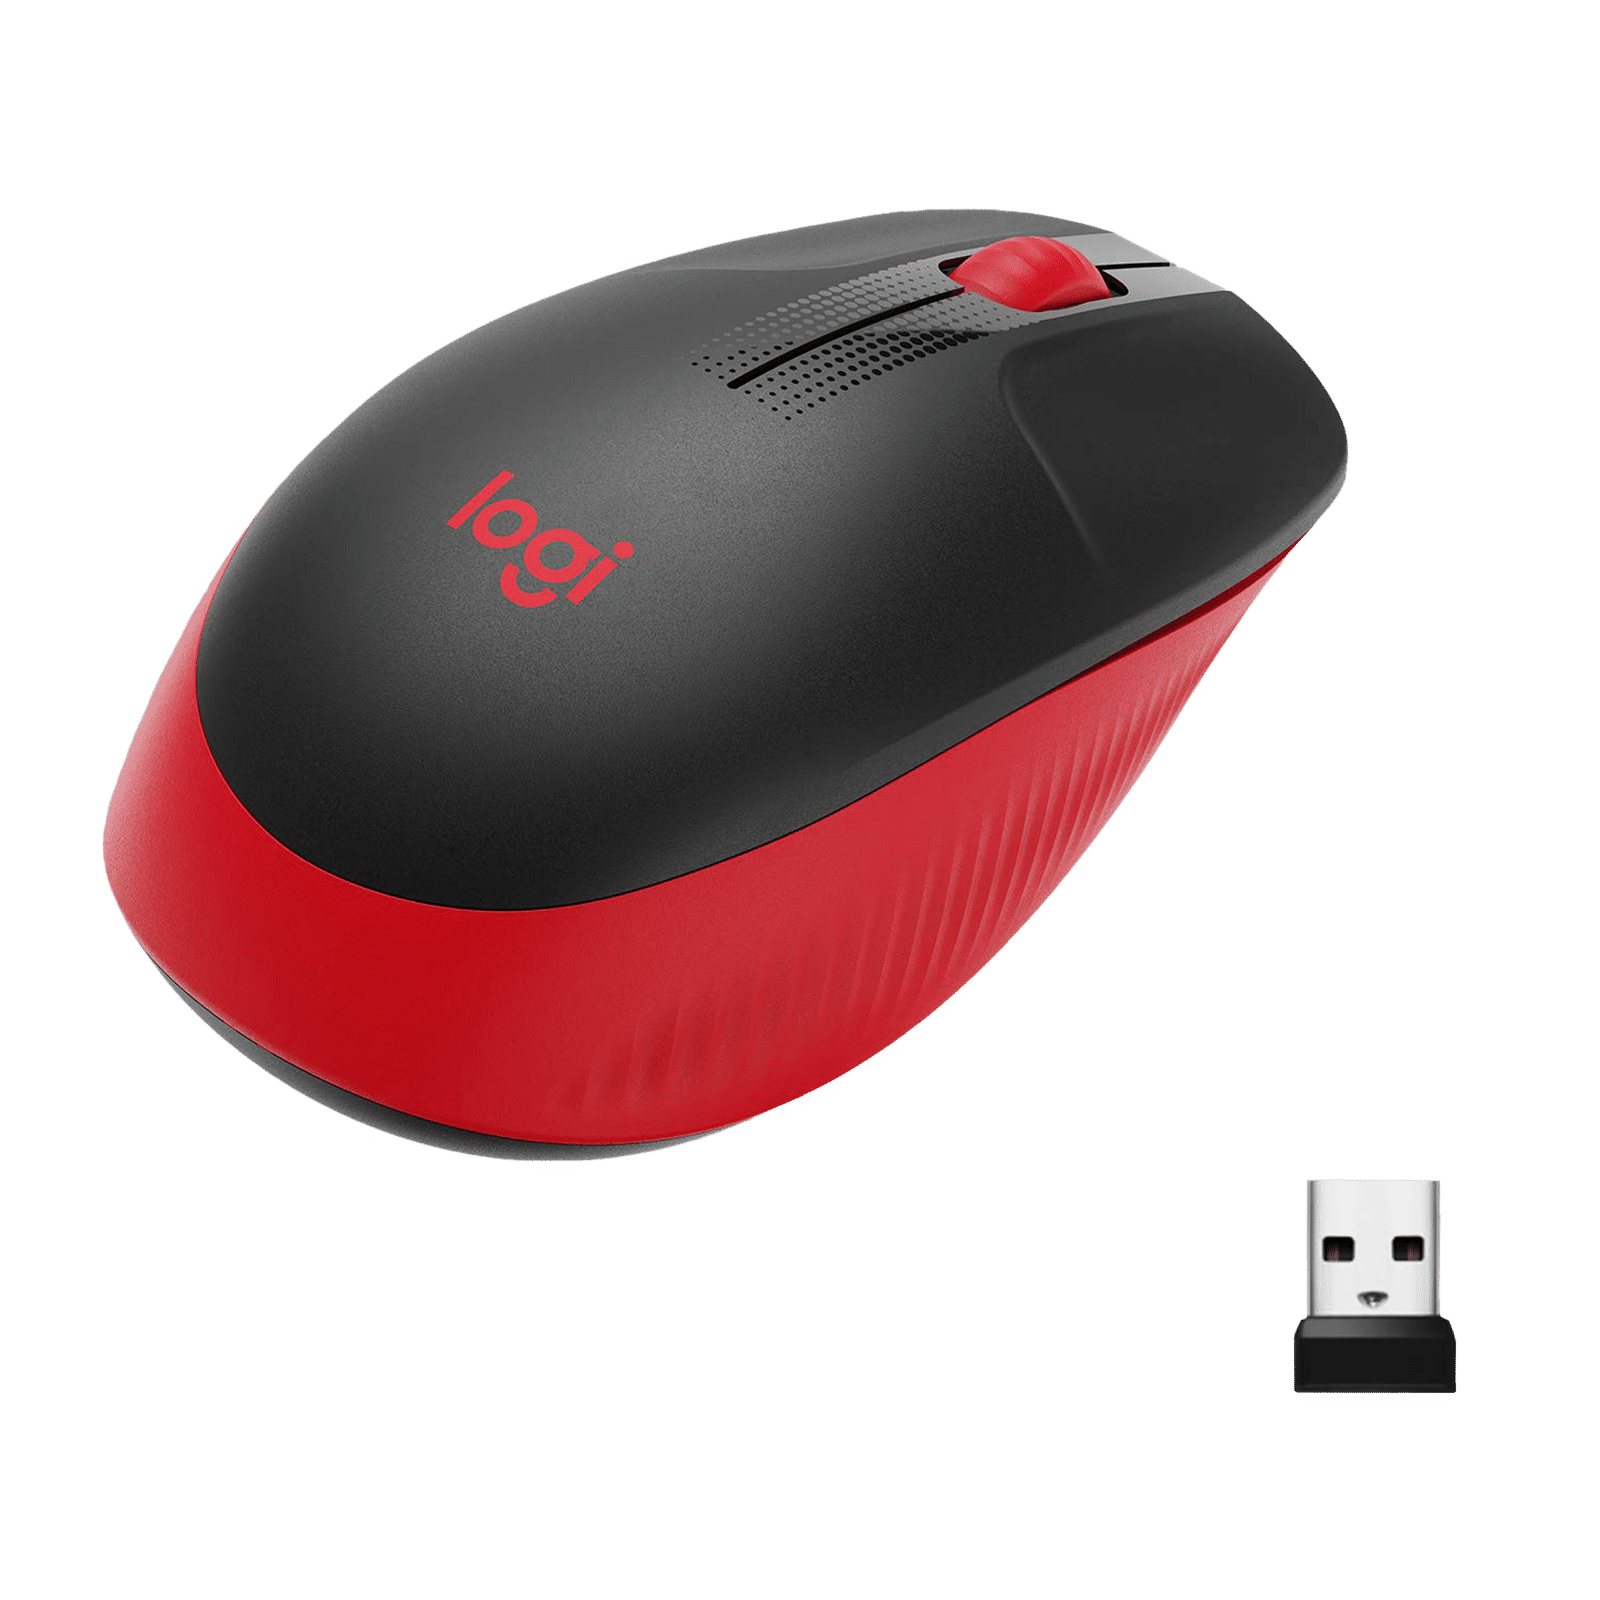 New Logitech M190 Wireless Mouse Brings Full-Size and Long-Lasting